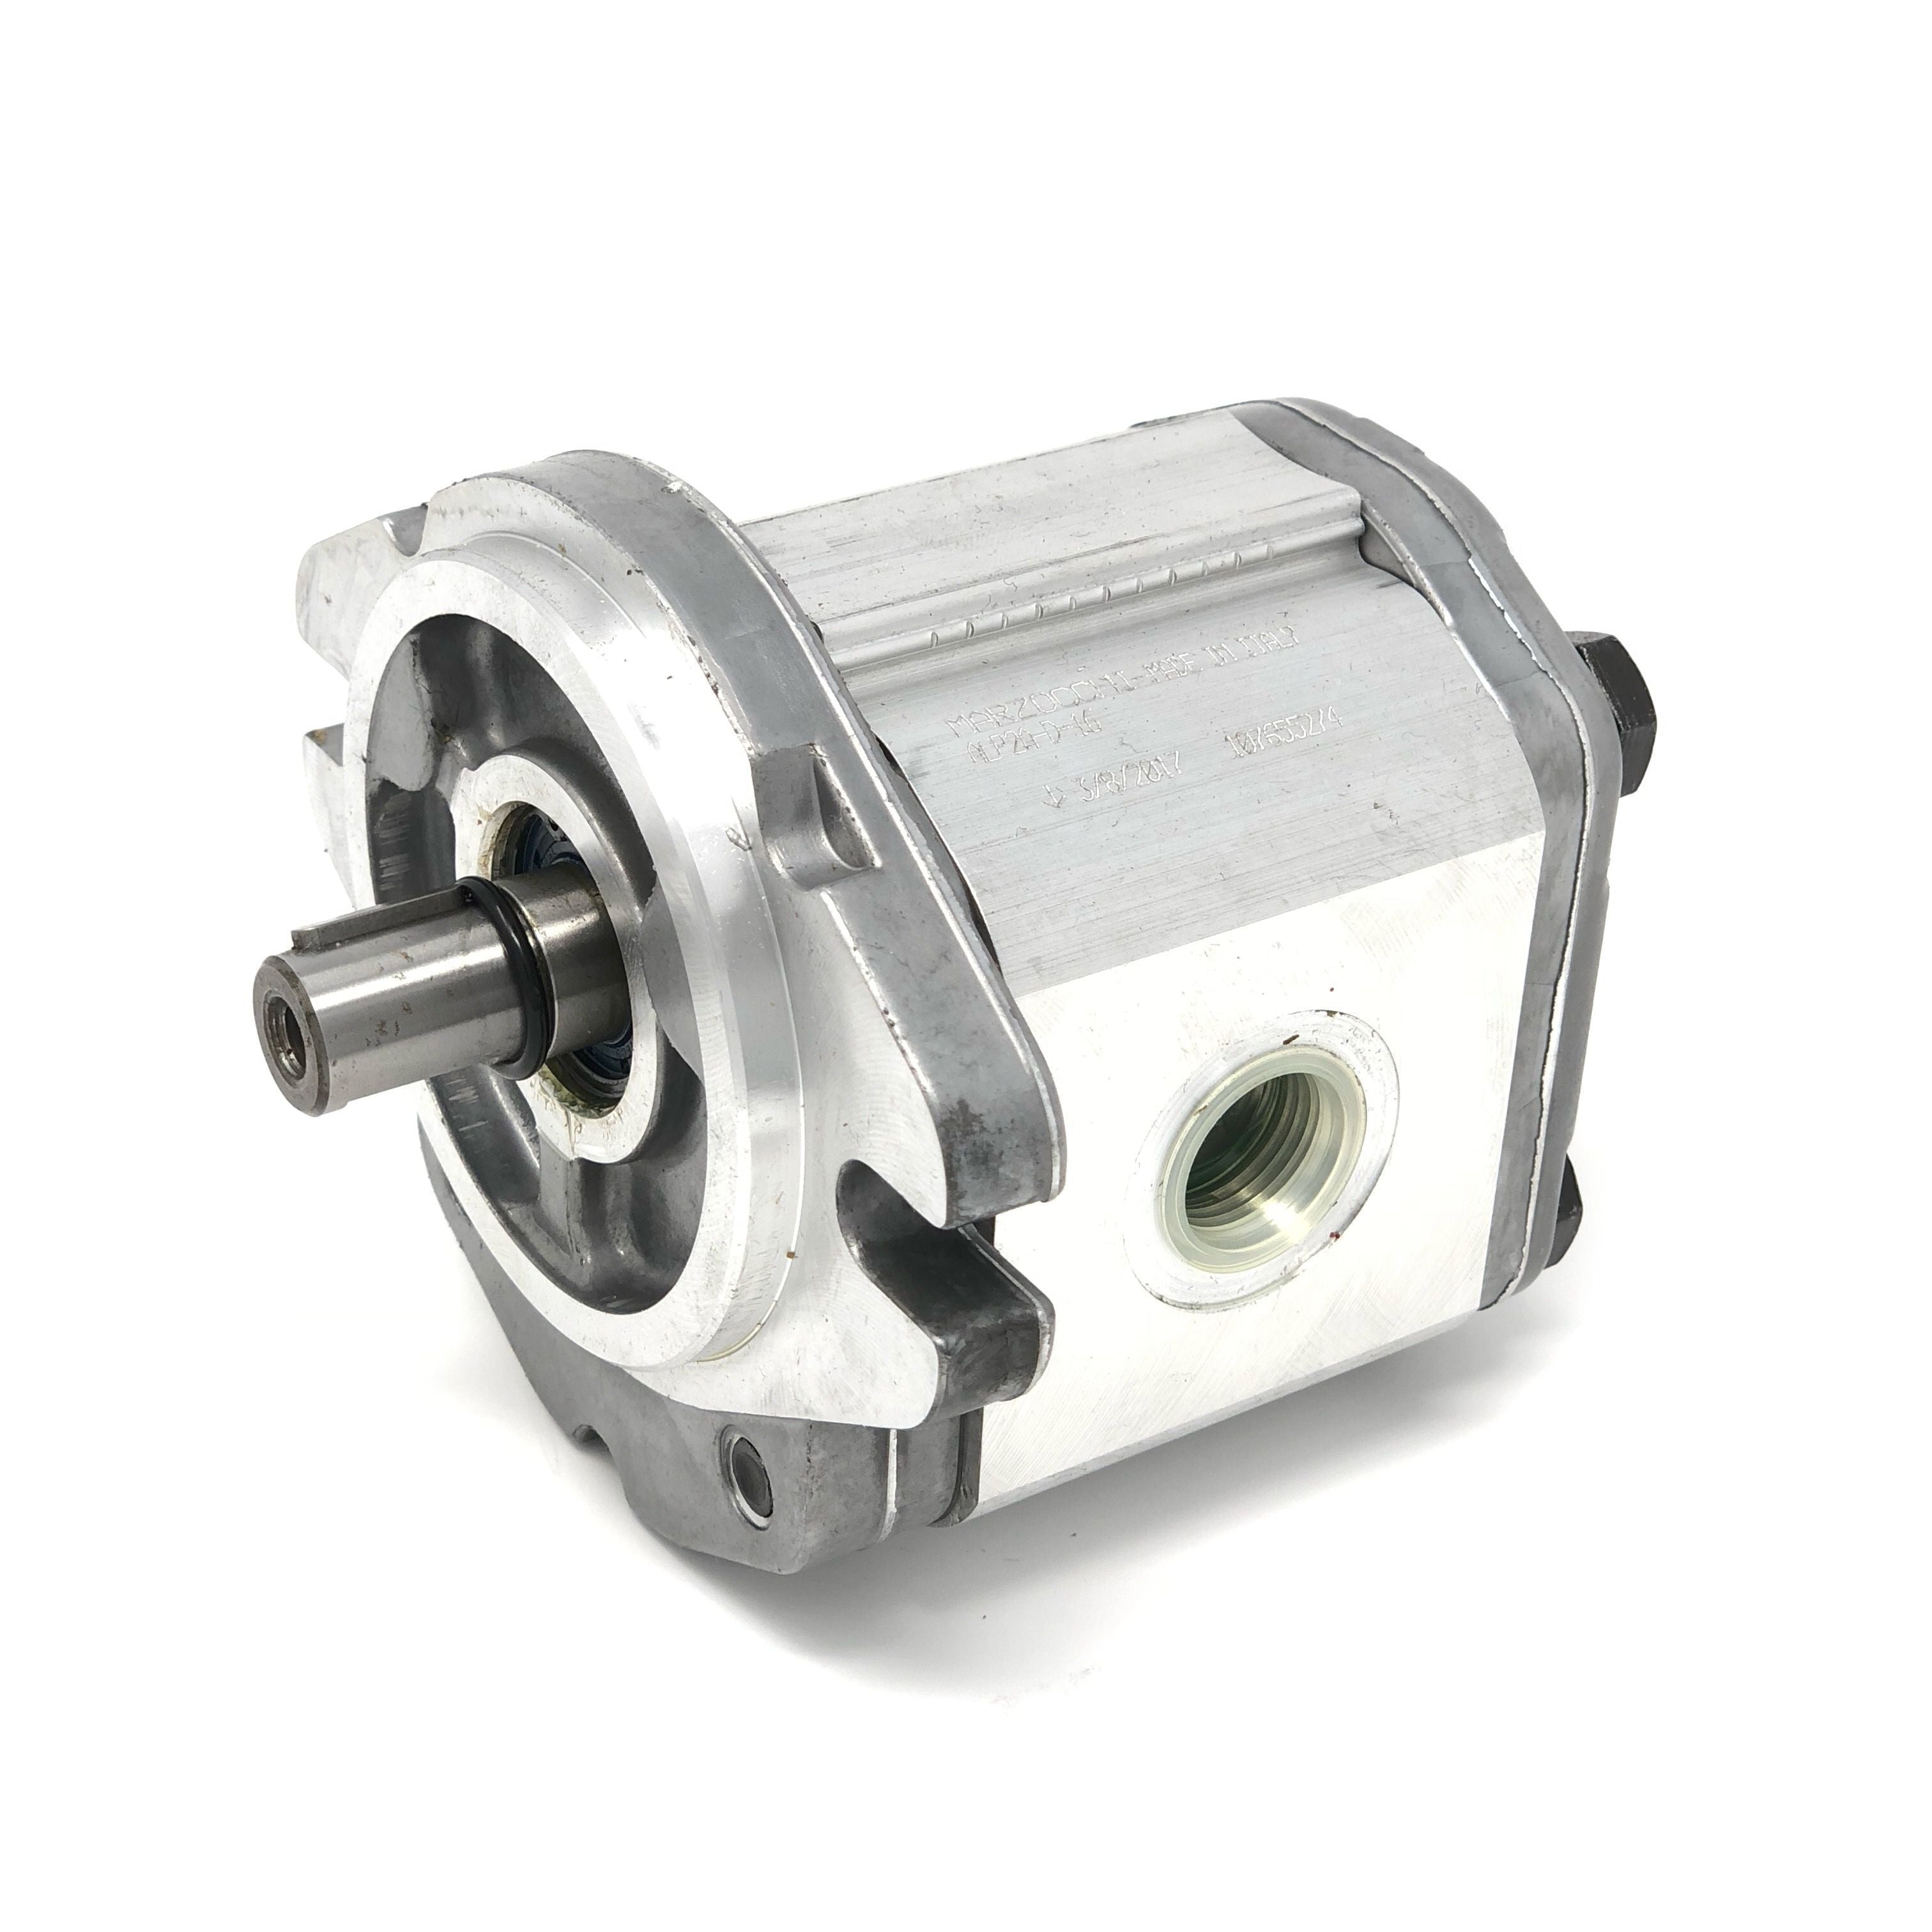 ALP2A-D-40 : Marzocchi Gear Pump, CW, 28.2cc (1.7202in3), 13.4 GPM, 2465psi, 1800 RPM, #12 SAE (3/4") In, #10 SAE (5/8") Out, Keyed Shaft 5/8" Bore x 5/32" Key, SAE A 2-Bolt Mount